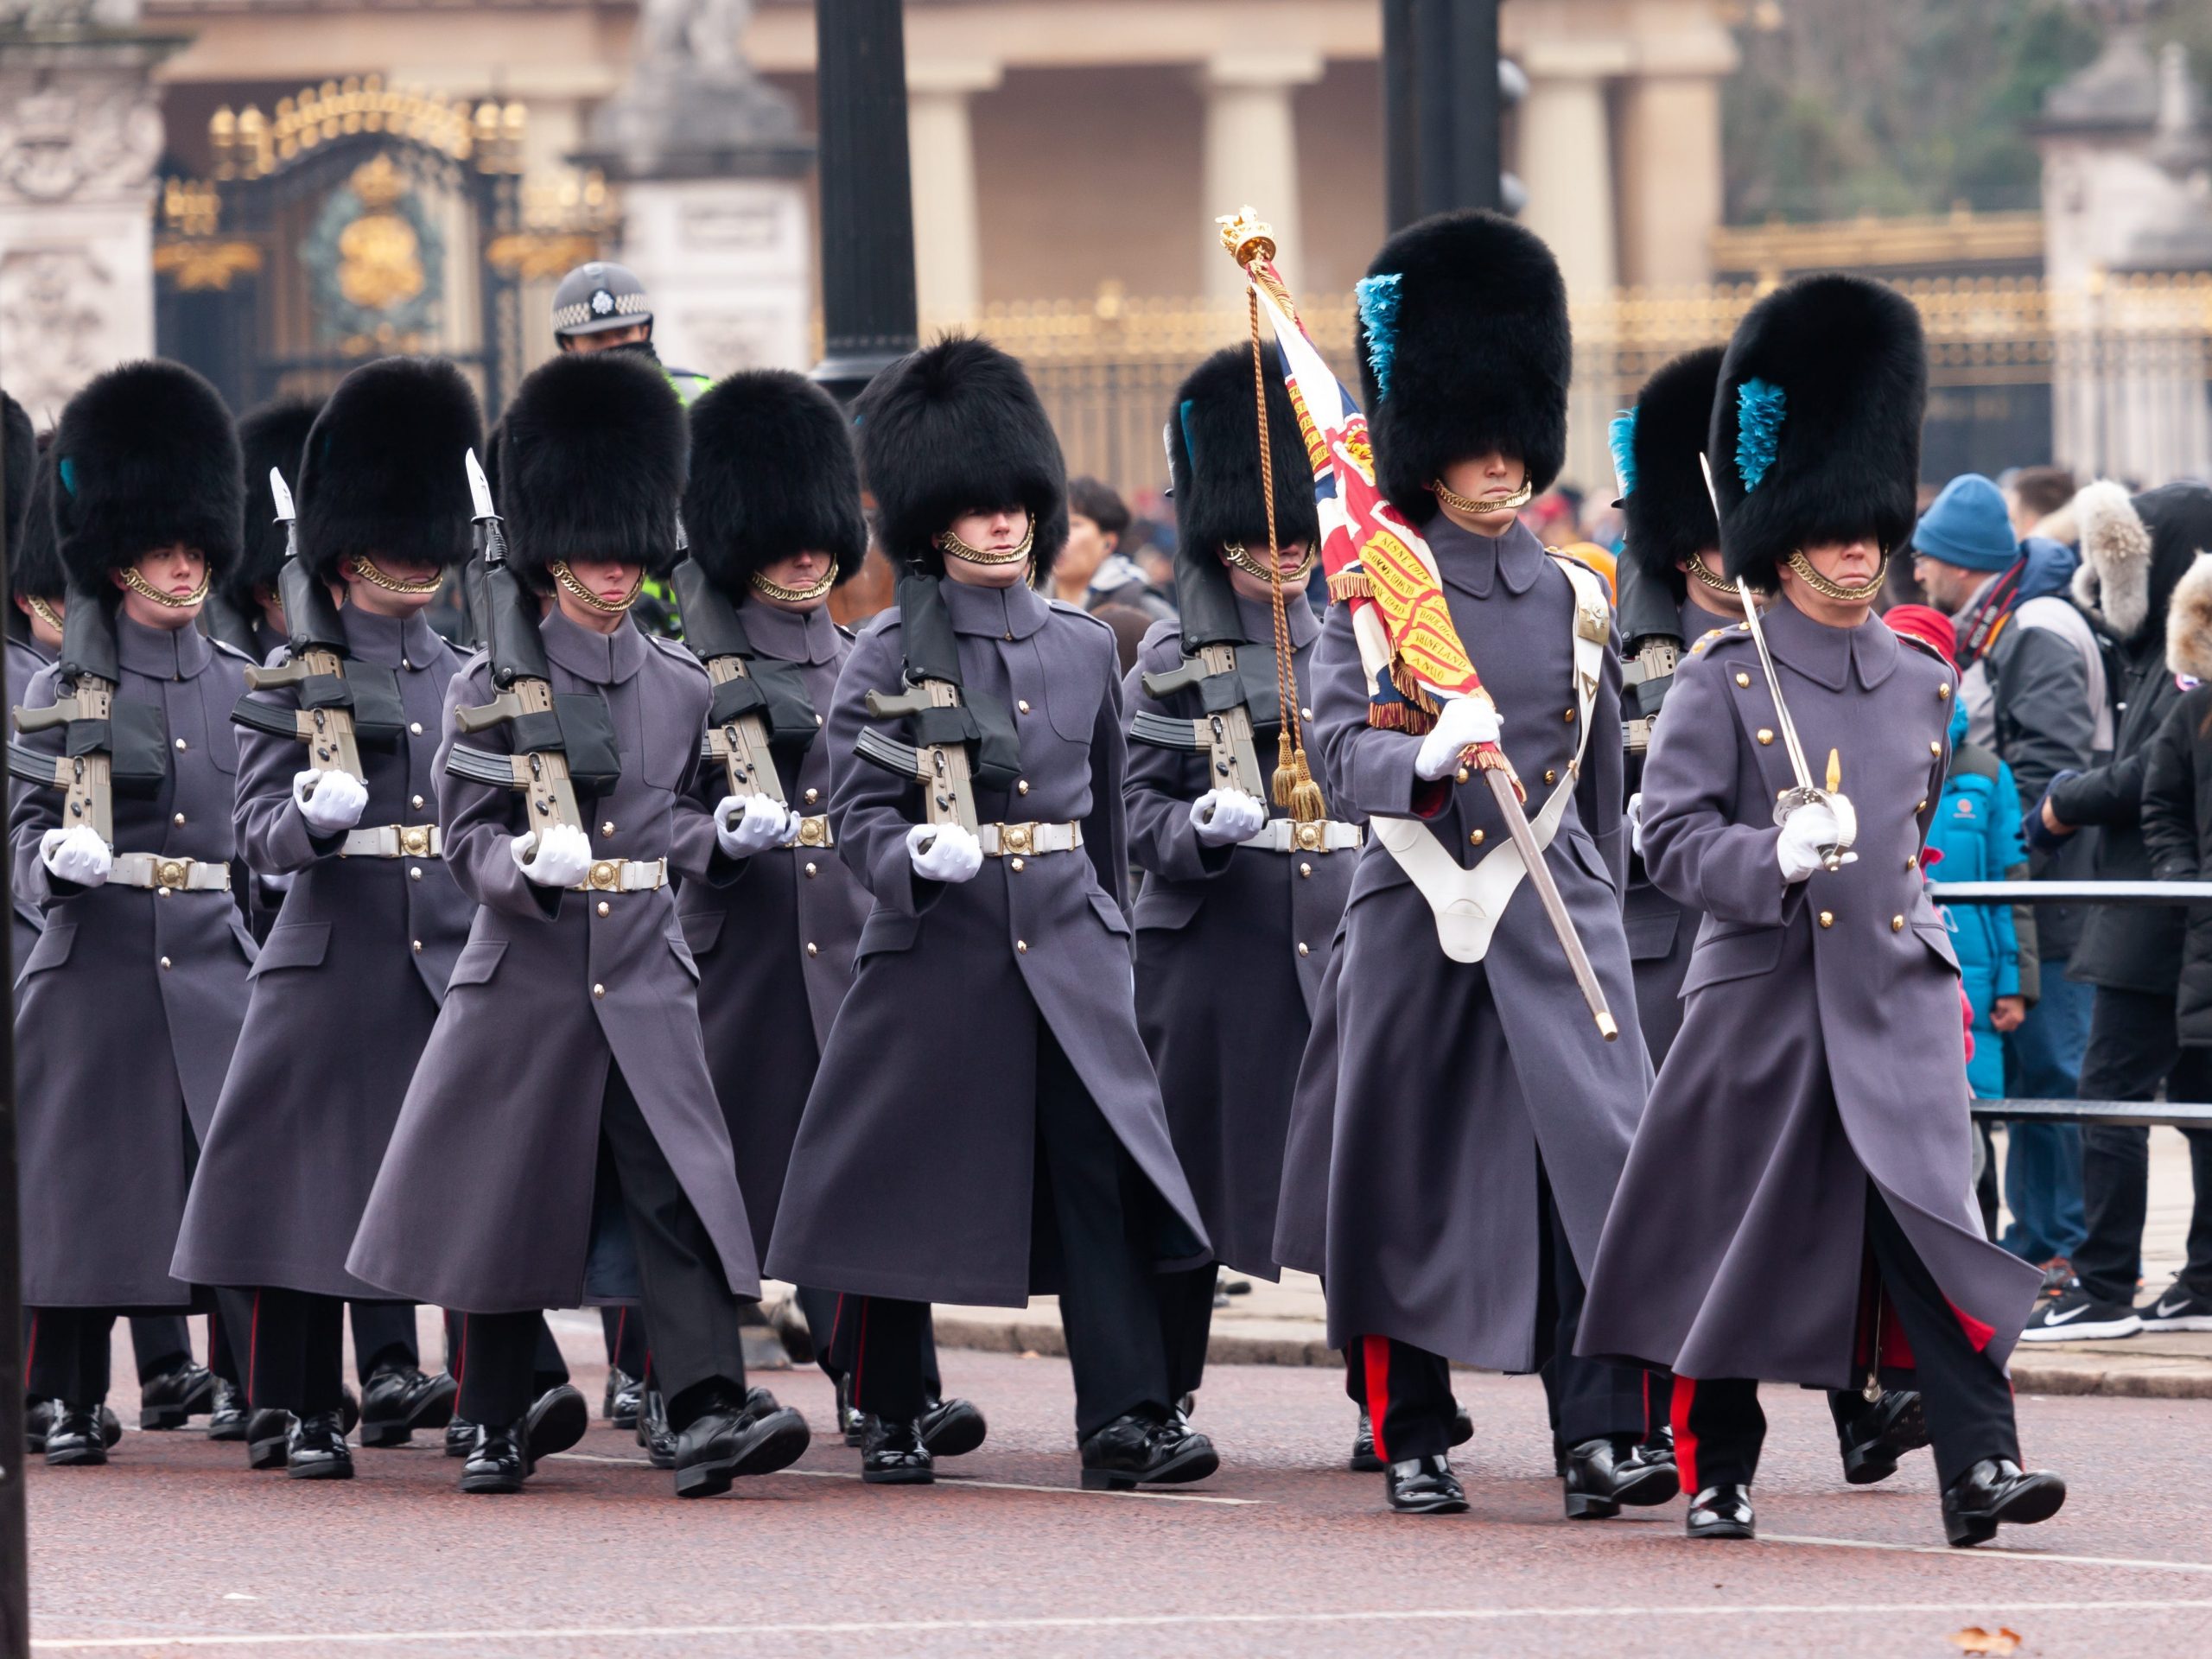 Soldiers of the Irish Guards march from Buckingham Palace along The Mall during the traditional changing of the guard ceremonies.